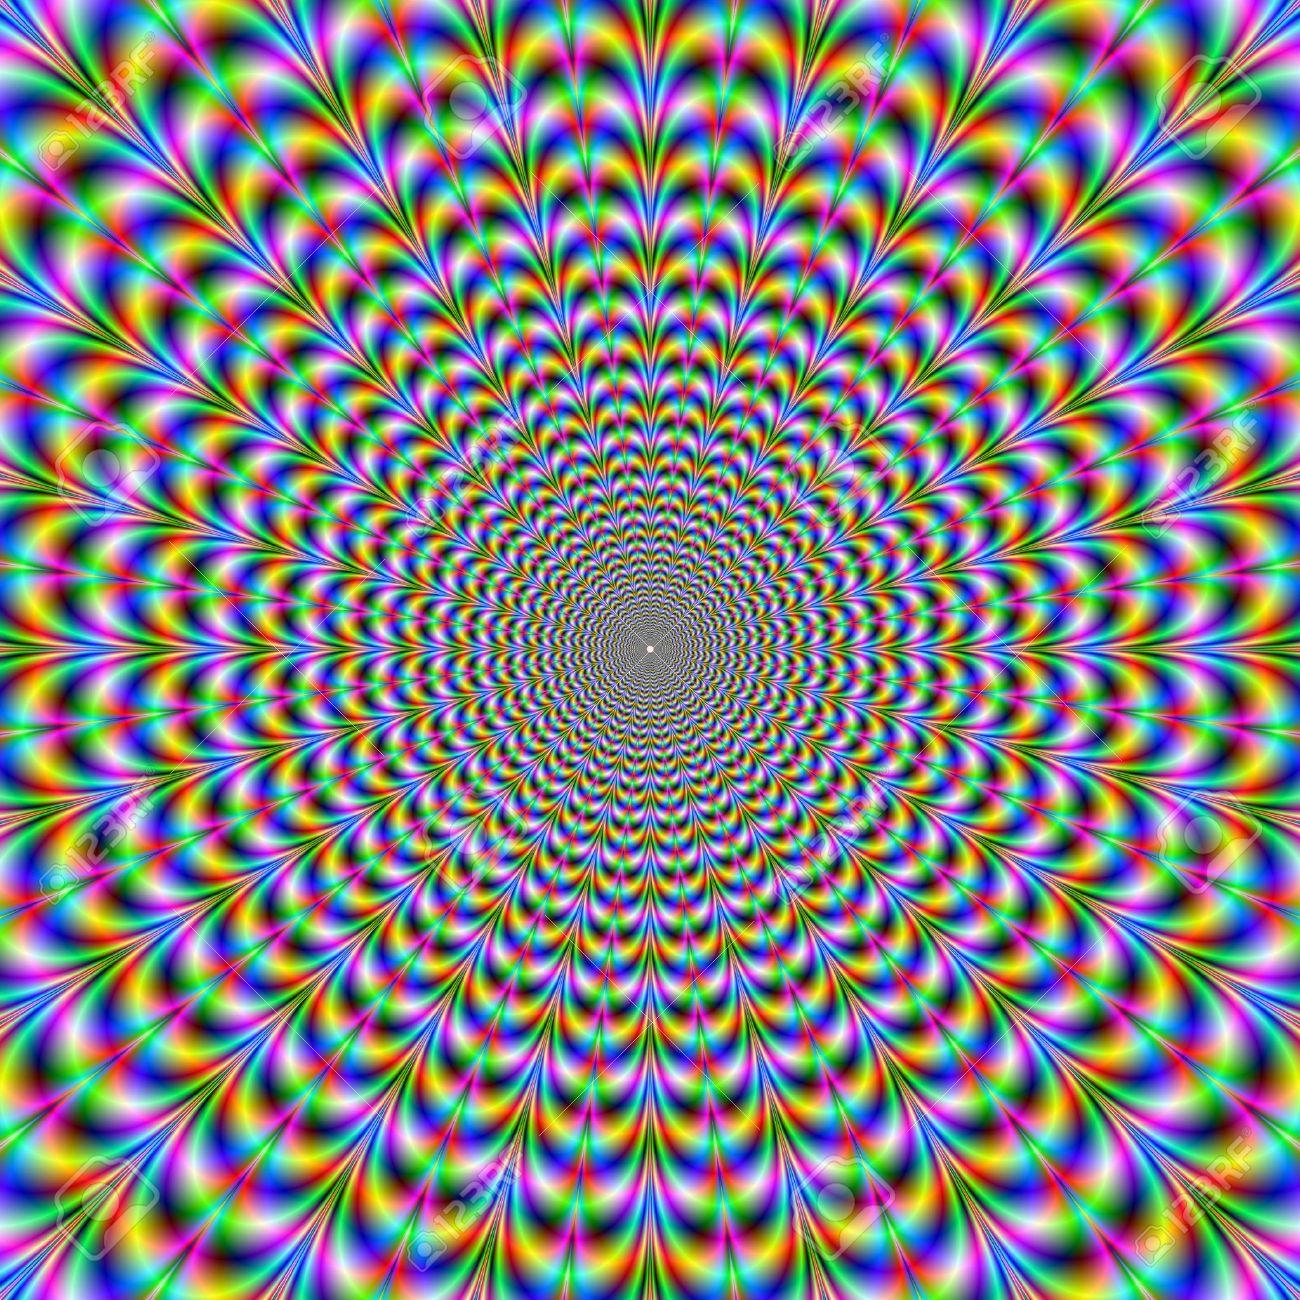 Exploring Digitized Optical Illusions: Design that Messes with our ...